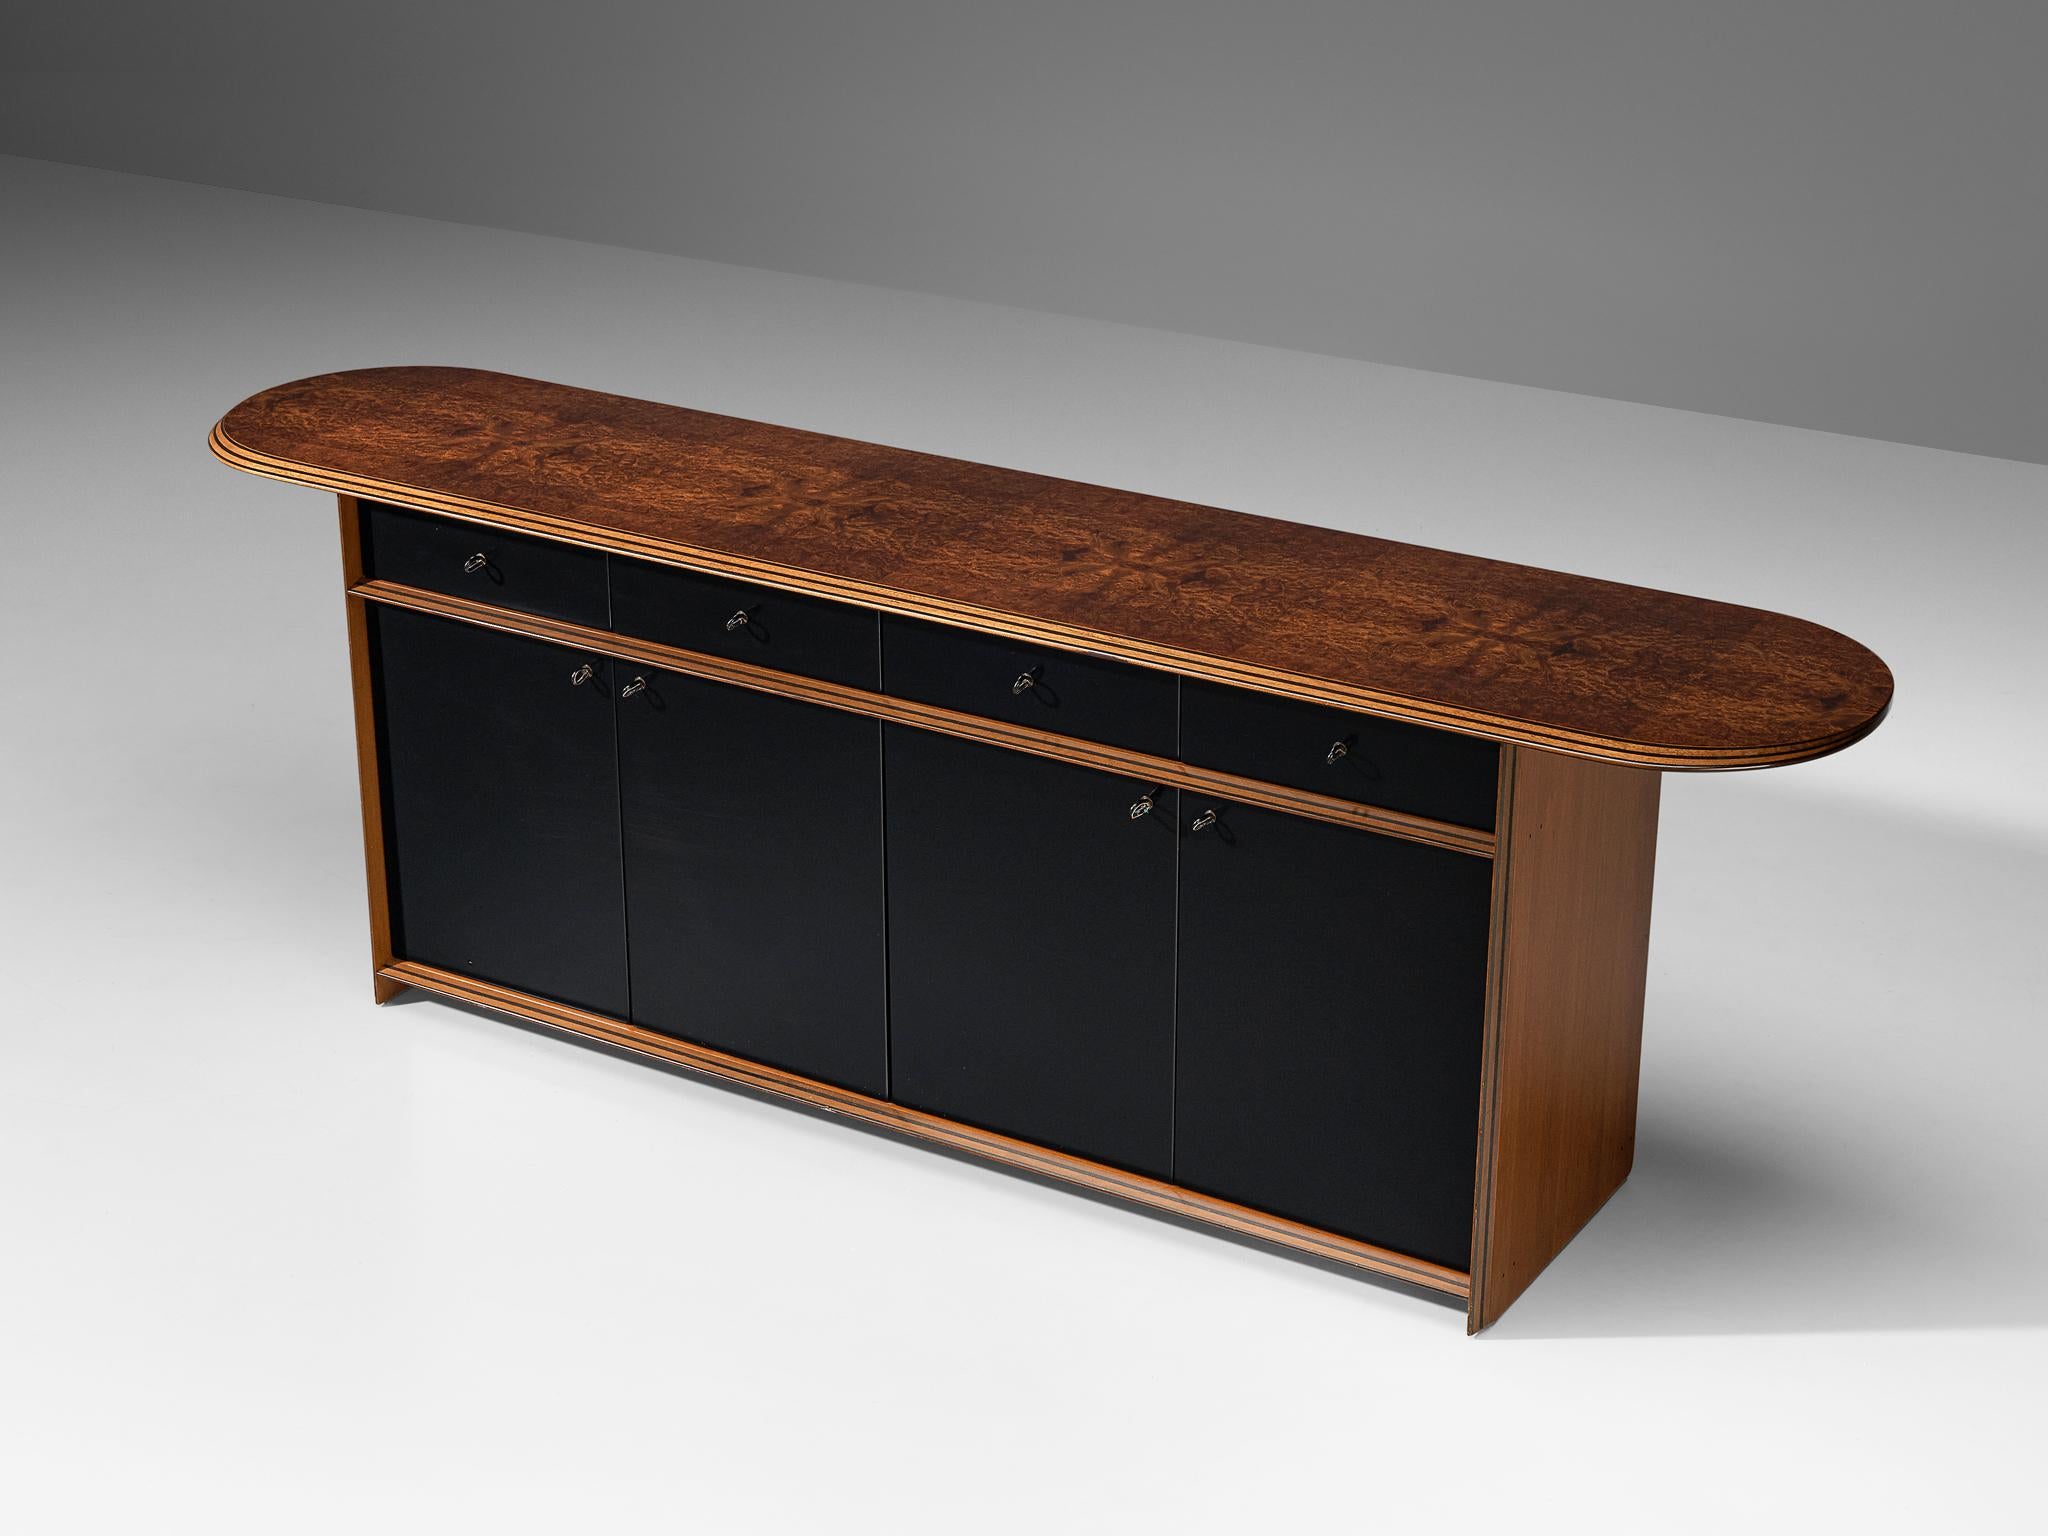 Afra & Tobia Scarpa for Maxalto, sideboard, model 'Artona', walnut, leather, Italy, 1975/1979

Gorgeous sideboard made in walnut and leather and designed by duo Afra and Tobia Scarpa in the 1970s. This sideboard with a leather front is designed as